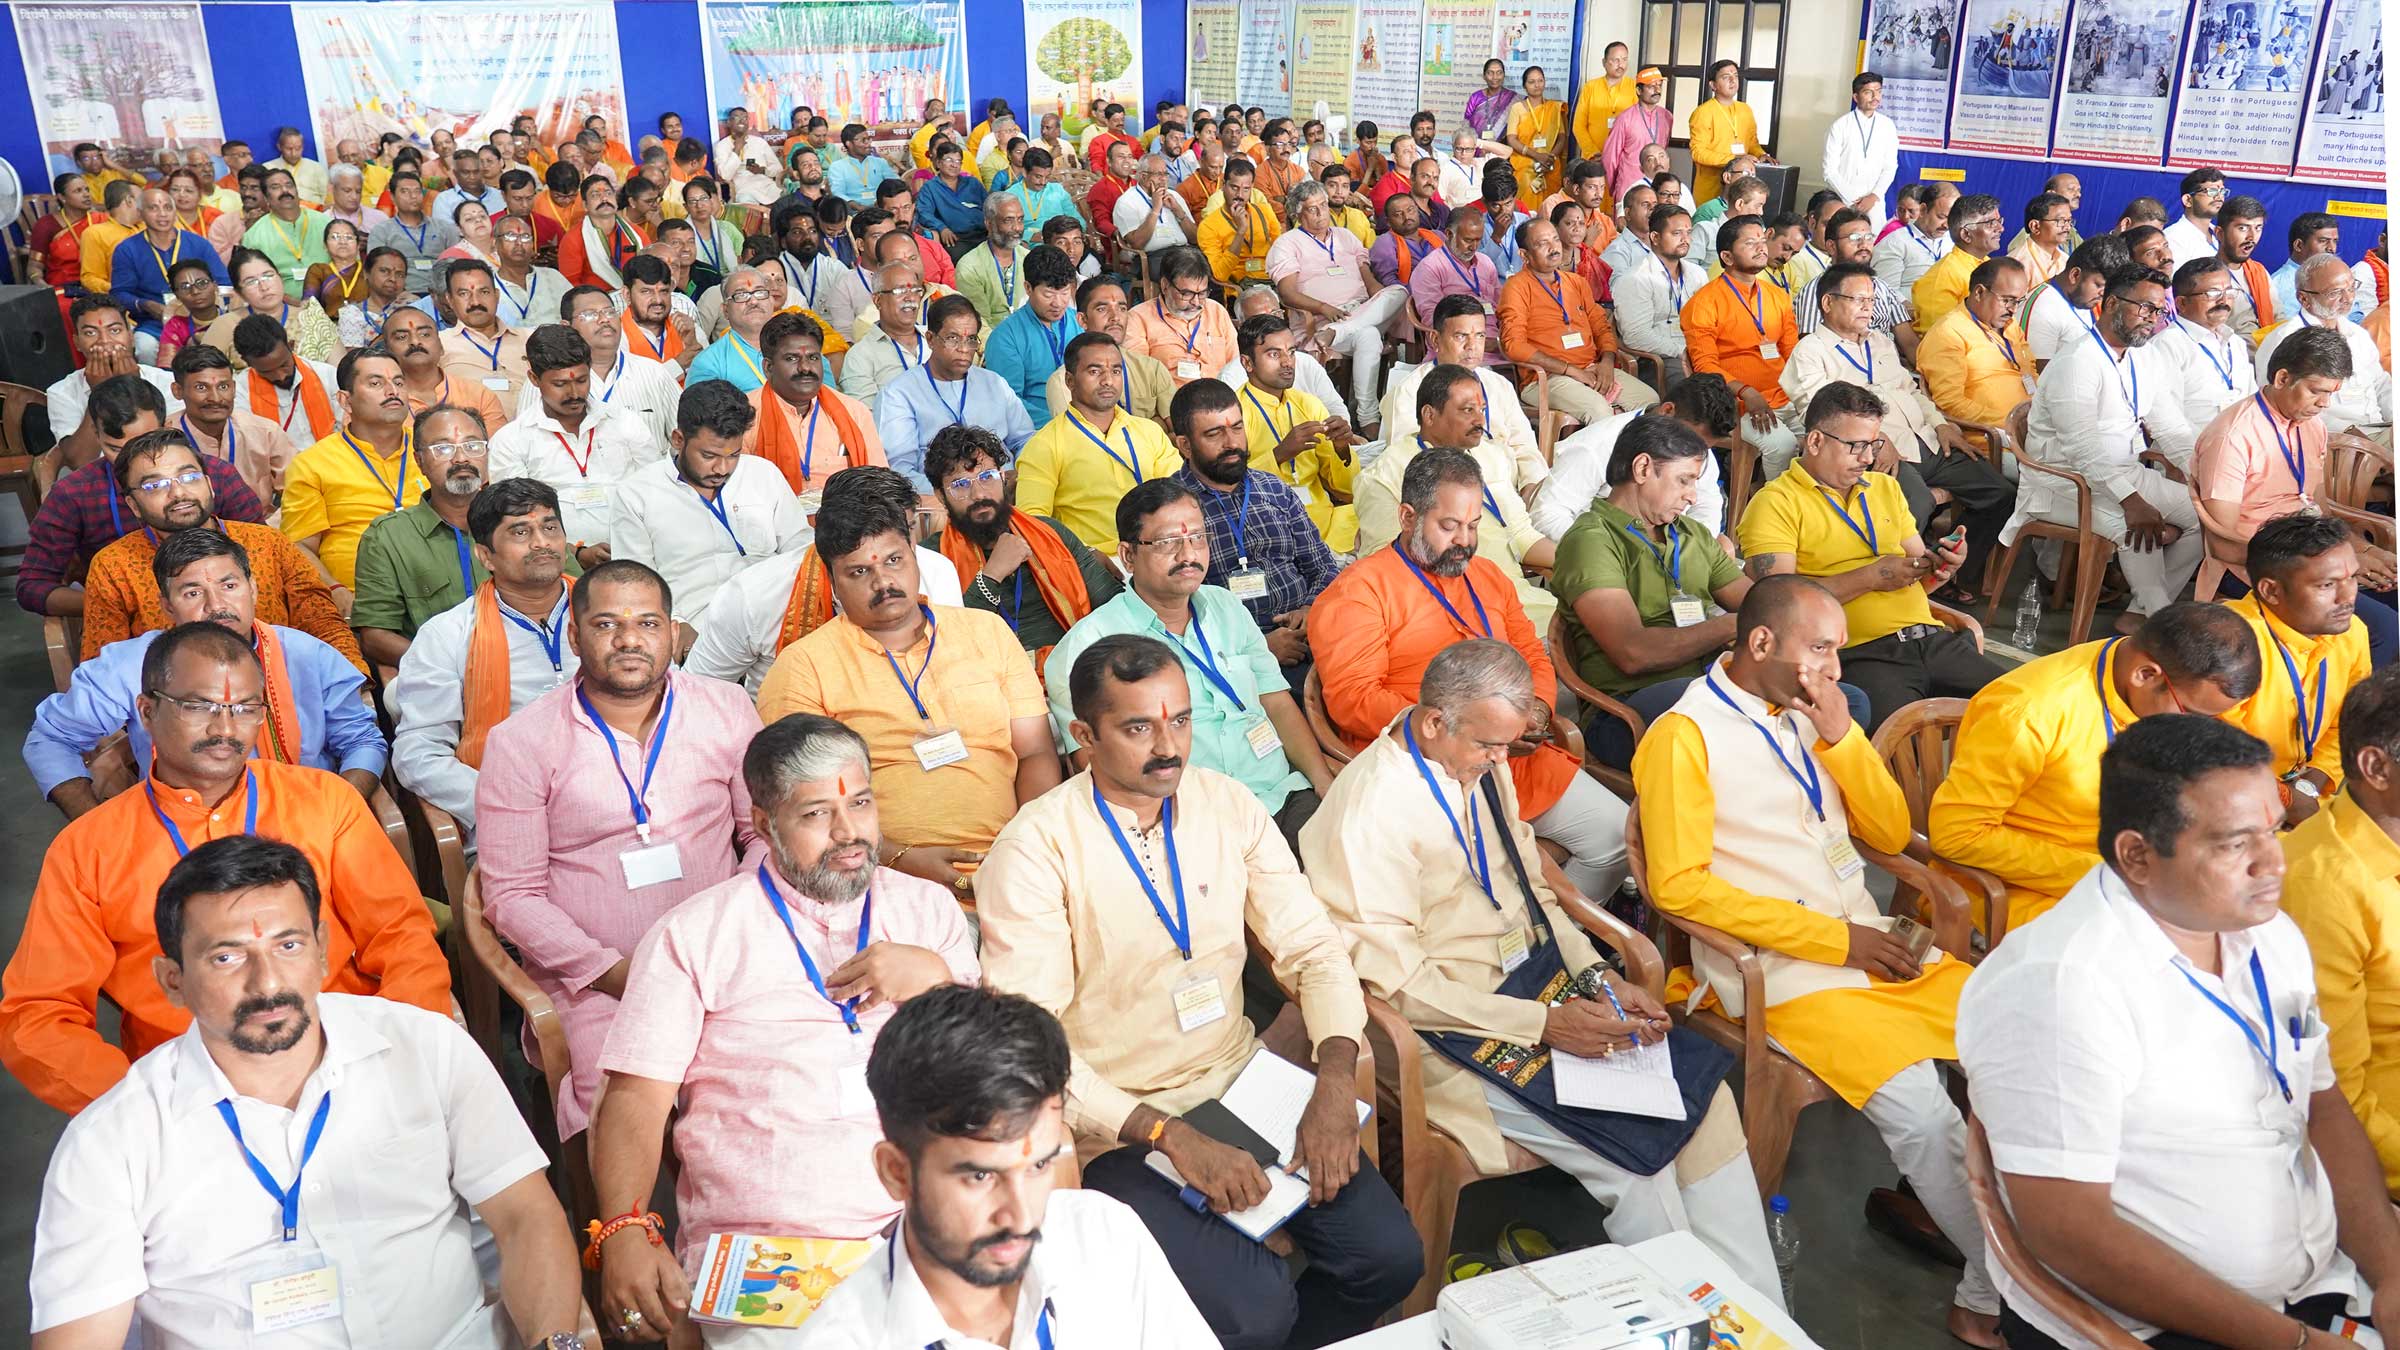 Devout Hindus listening intently to the scholarly speeches